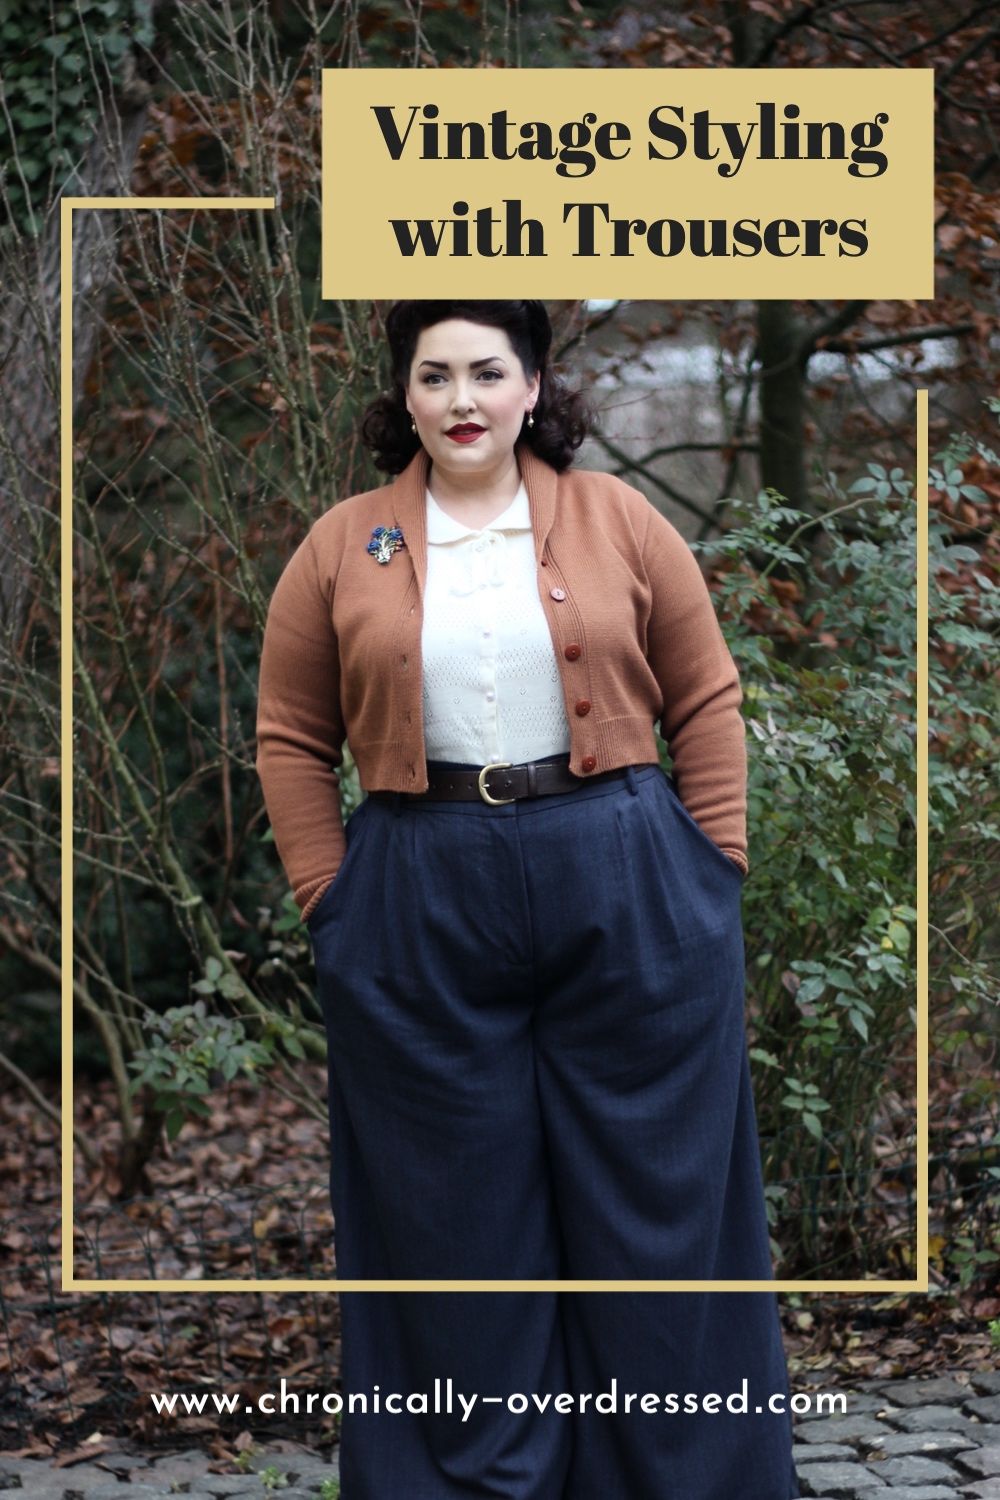 Vintage Styling with Trousers